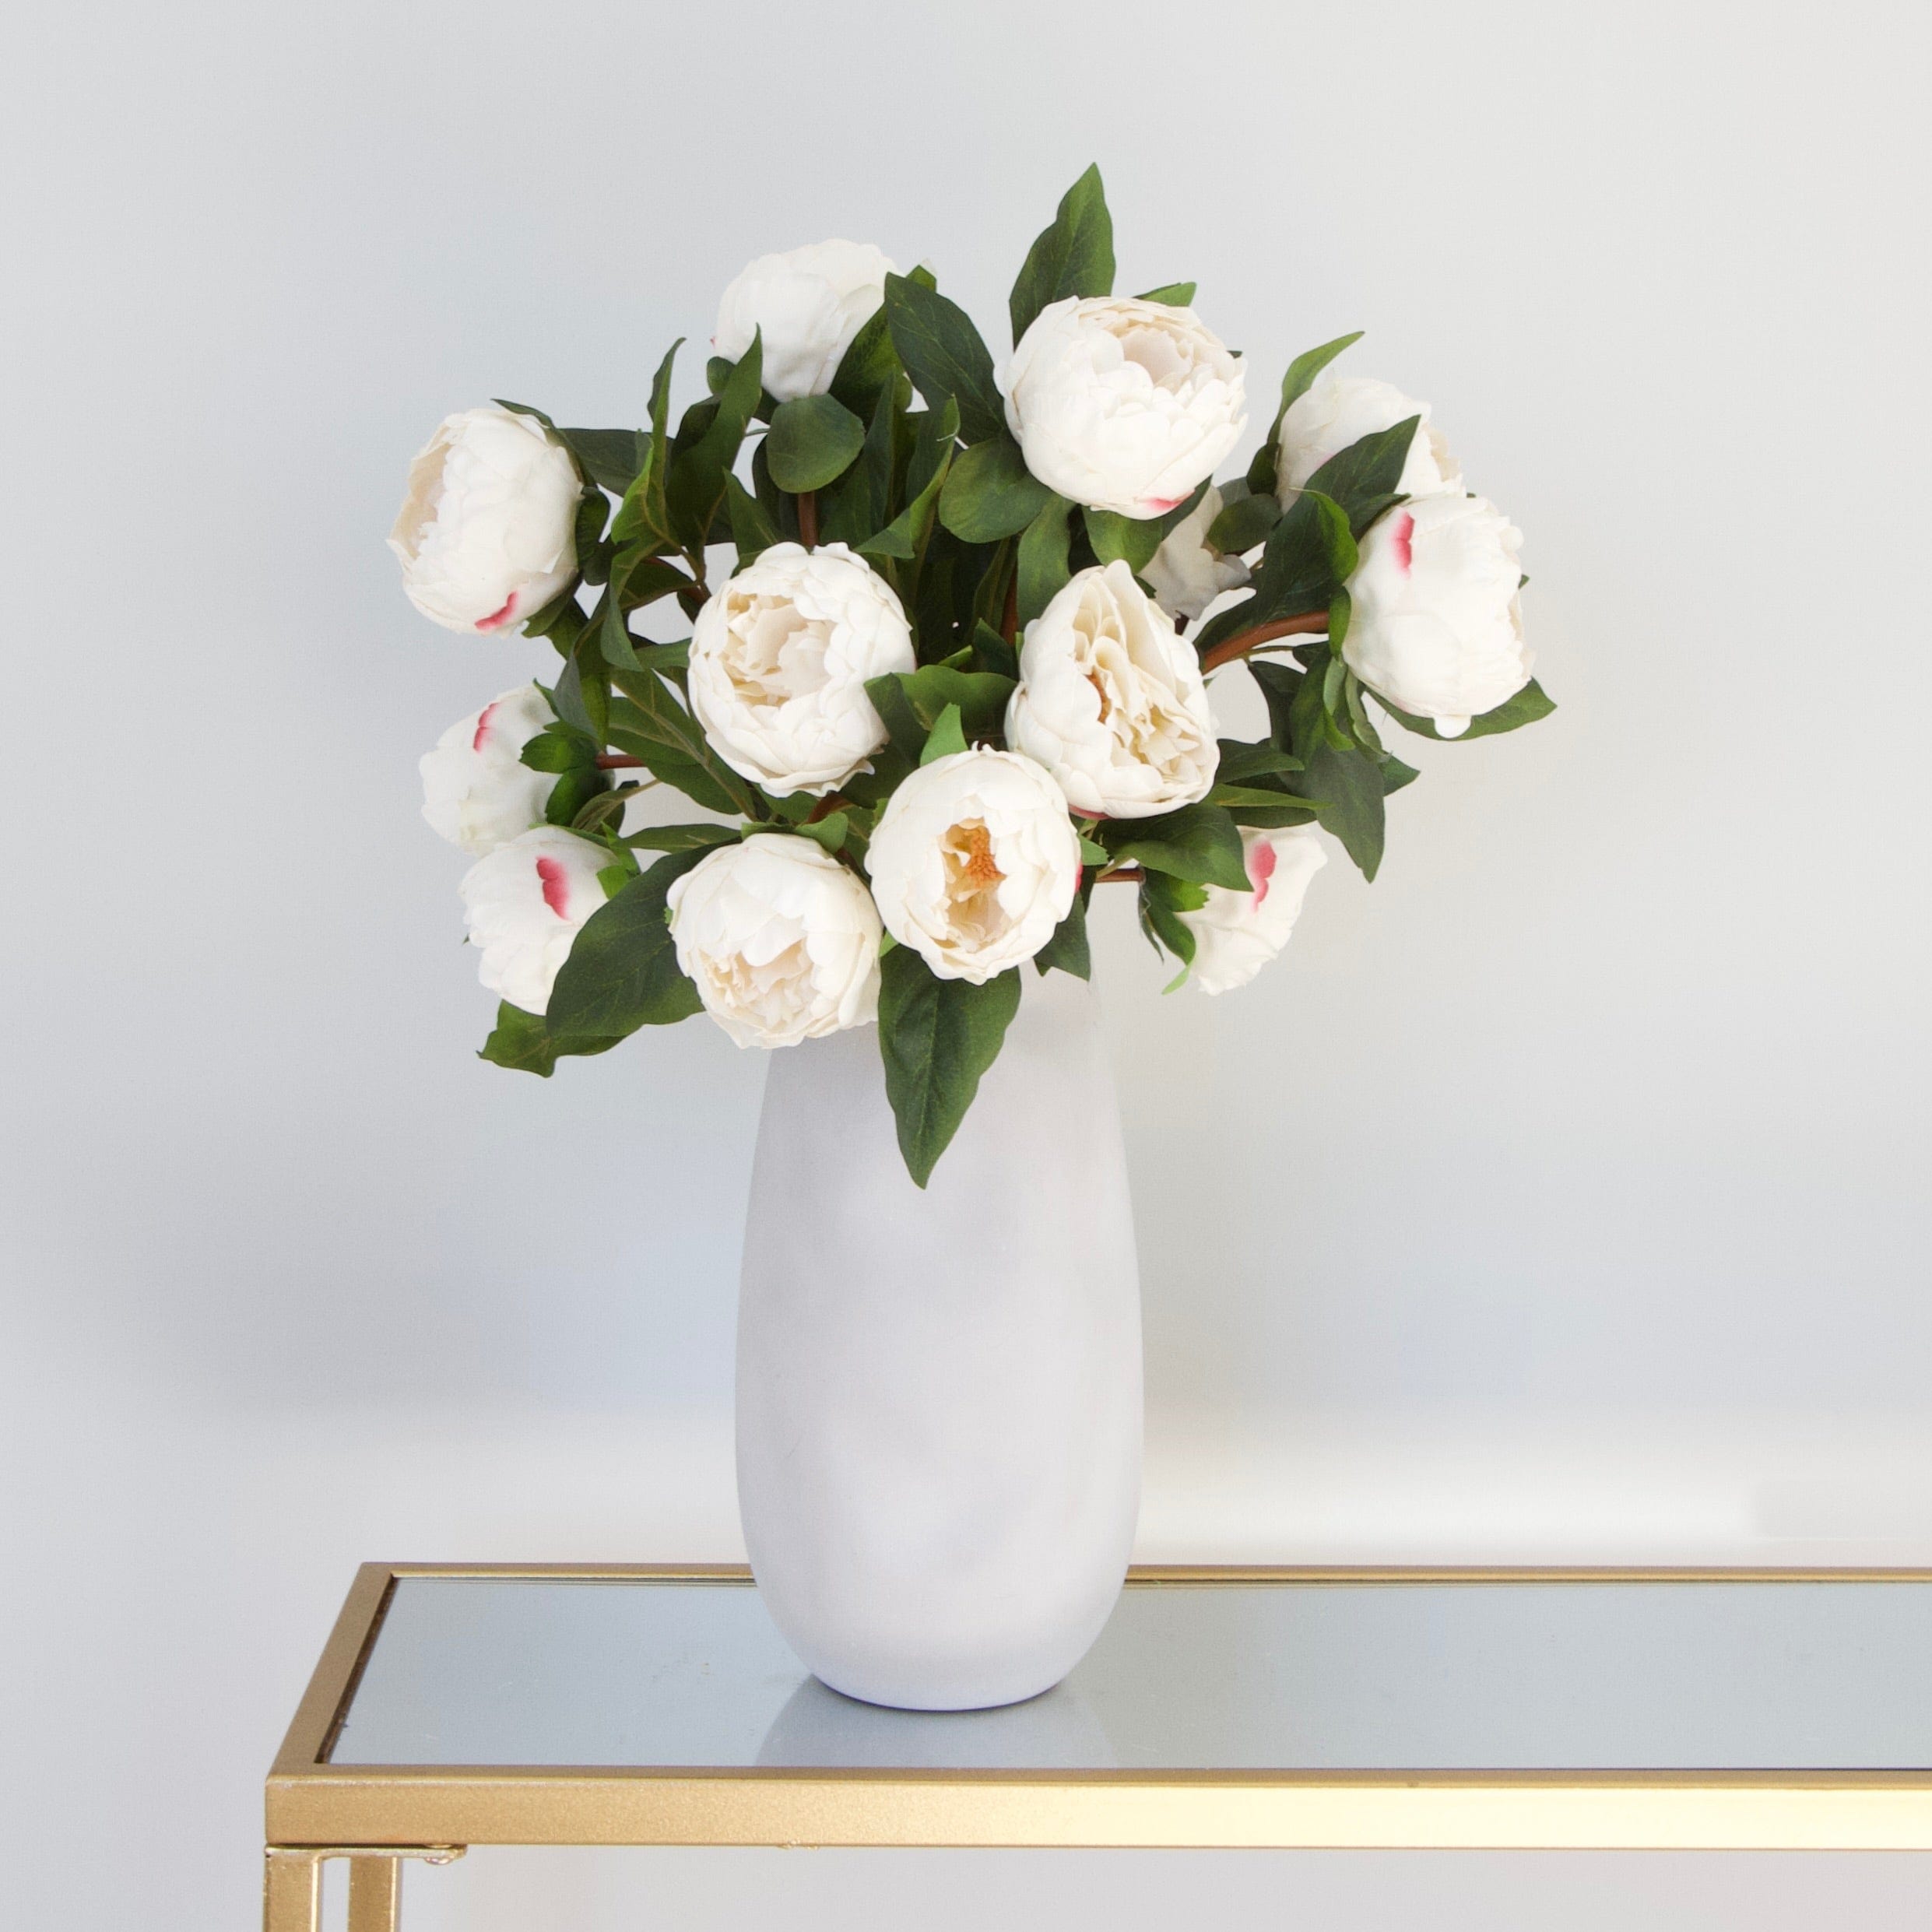 Luxury Realistic Artificial Fabric Silk White Two Bloom Real Touch Peony Buy Online from The Faux Flower Company | 7 stems of White Real Touch Peony ABZ9148WH styled in Naunton Vase ABP525B